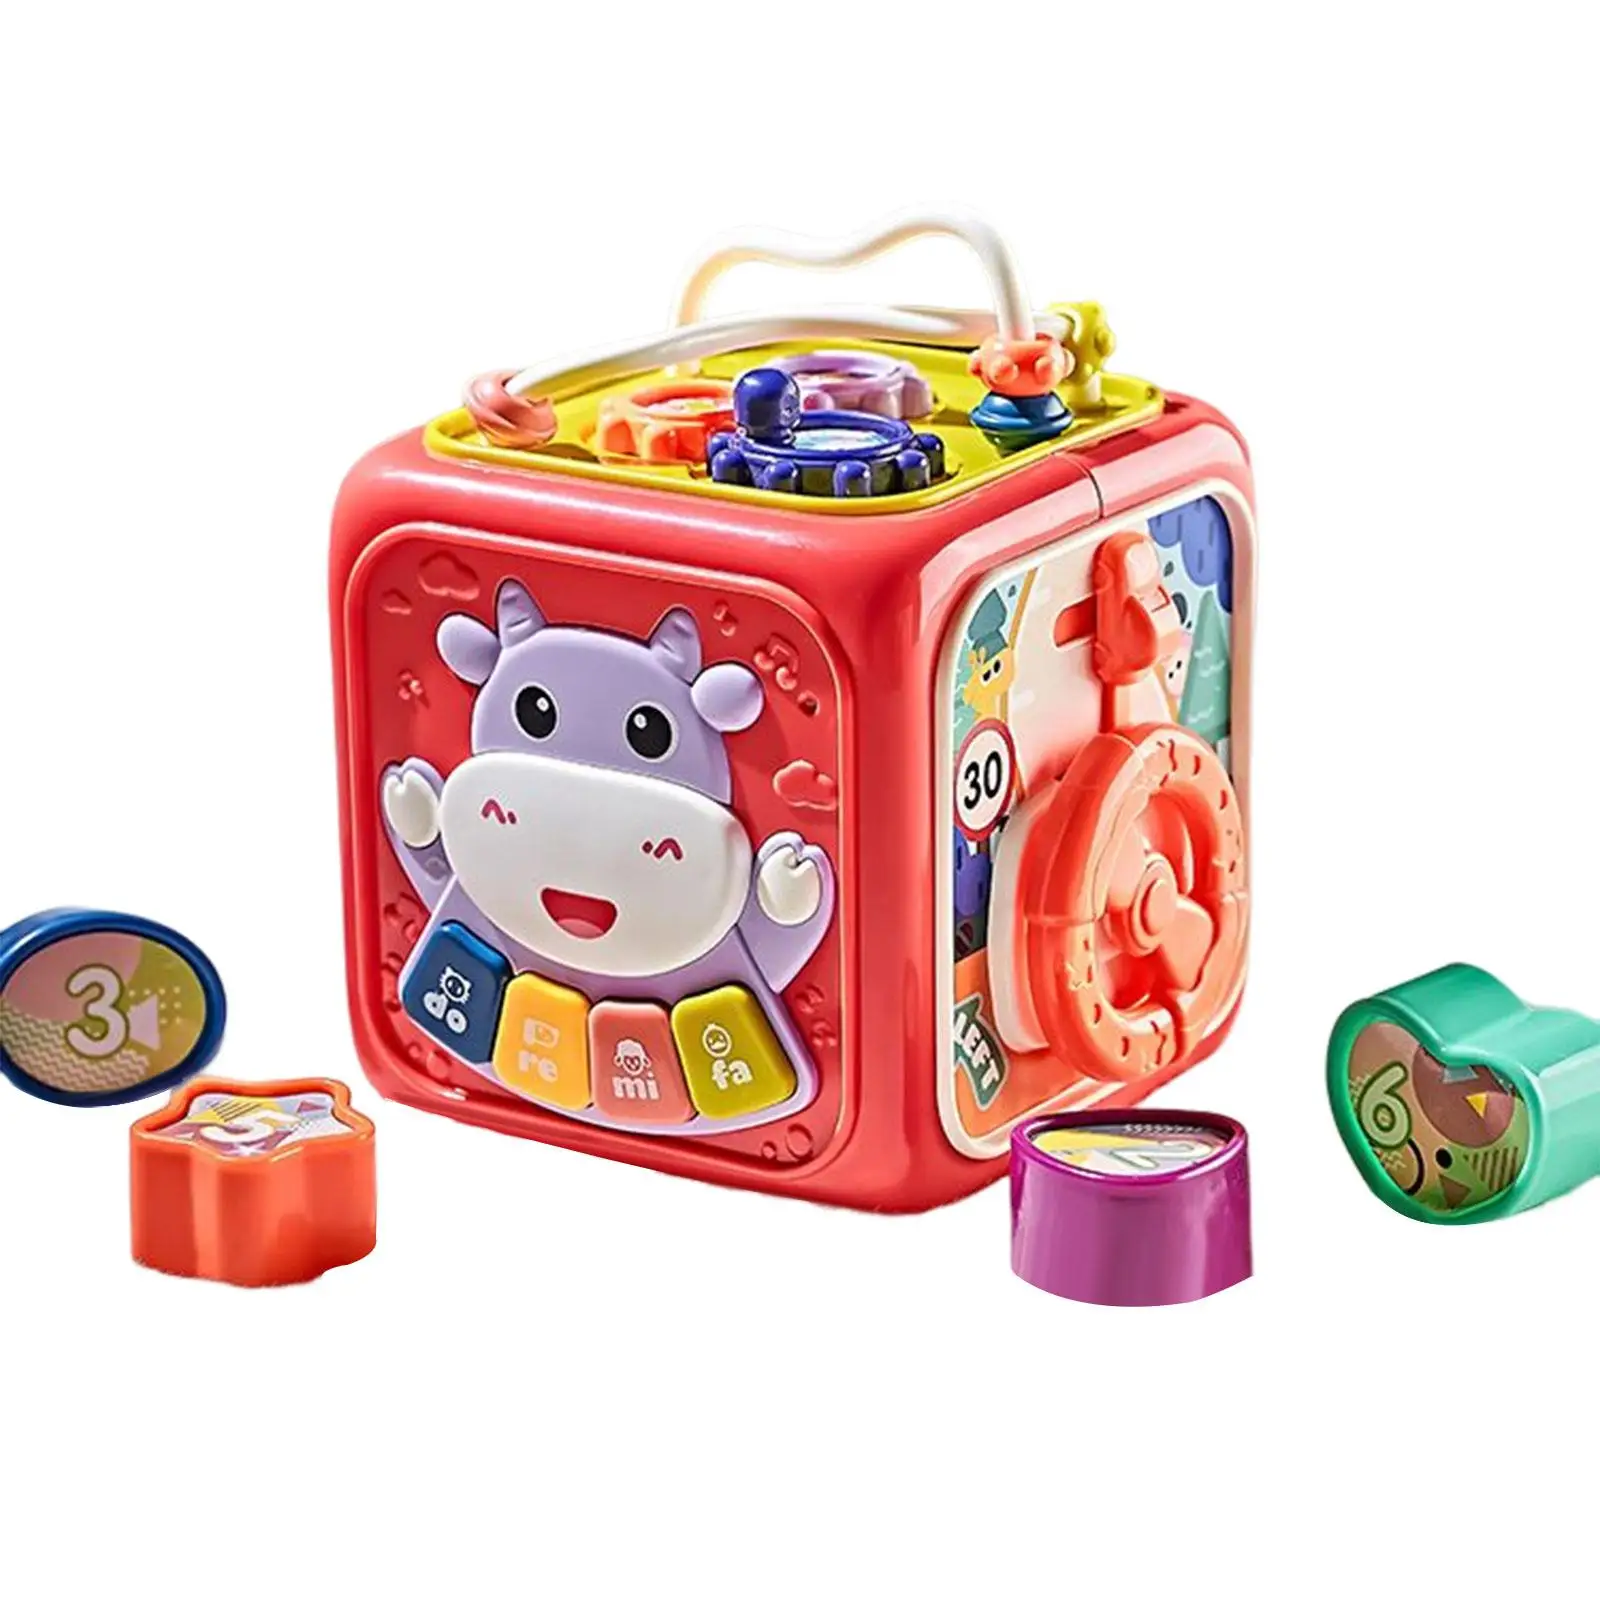 Baby Musical Toys Development Baby Activity Cube Toy 6 Sided Activity Center for Age 1 + Year Old Boys Girls Kids Birthday Gift